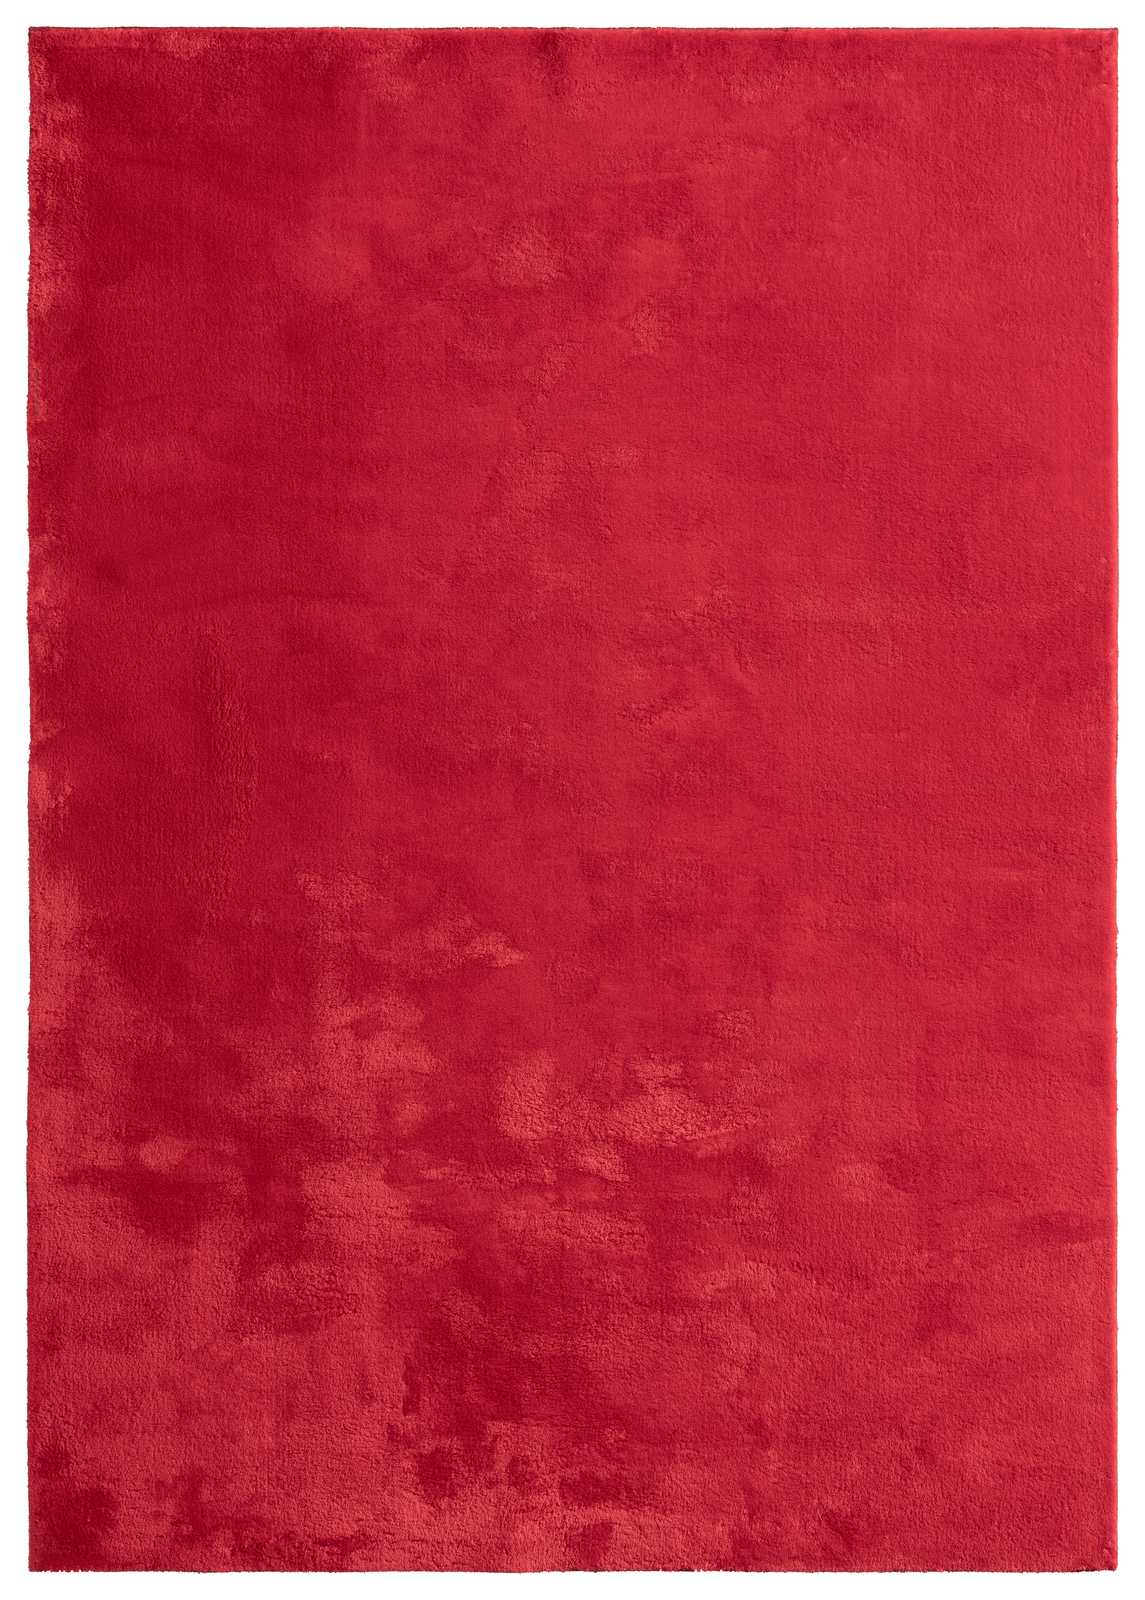             Extra soft high pile carpet in red - 170 x 120 cm
        